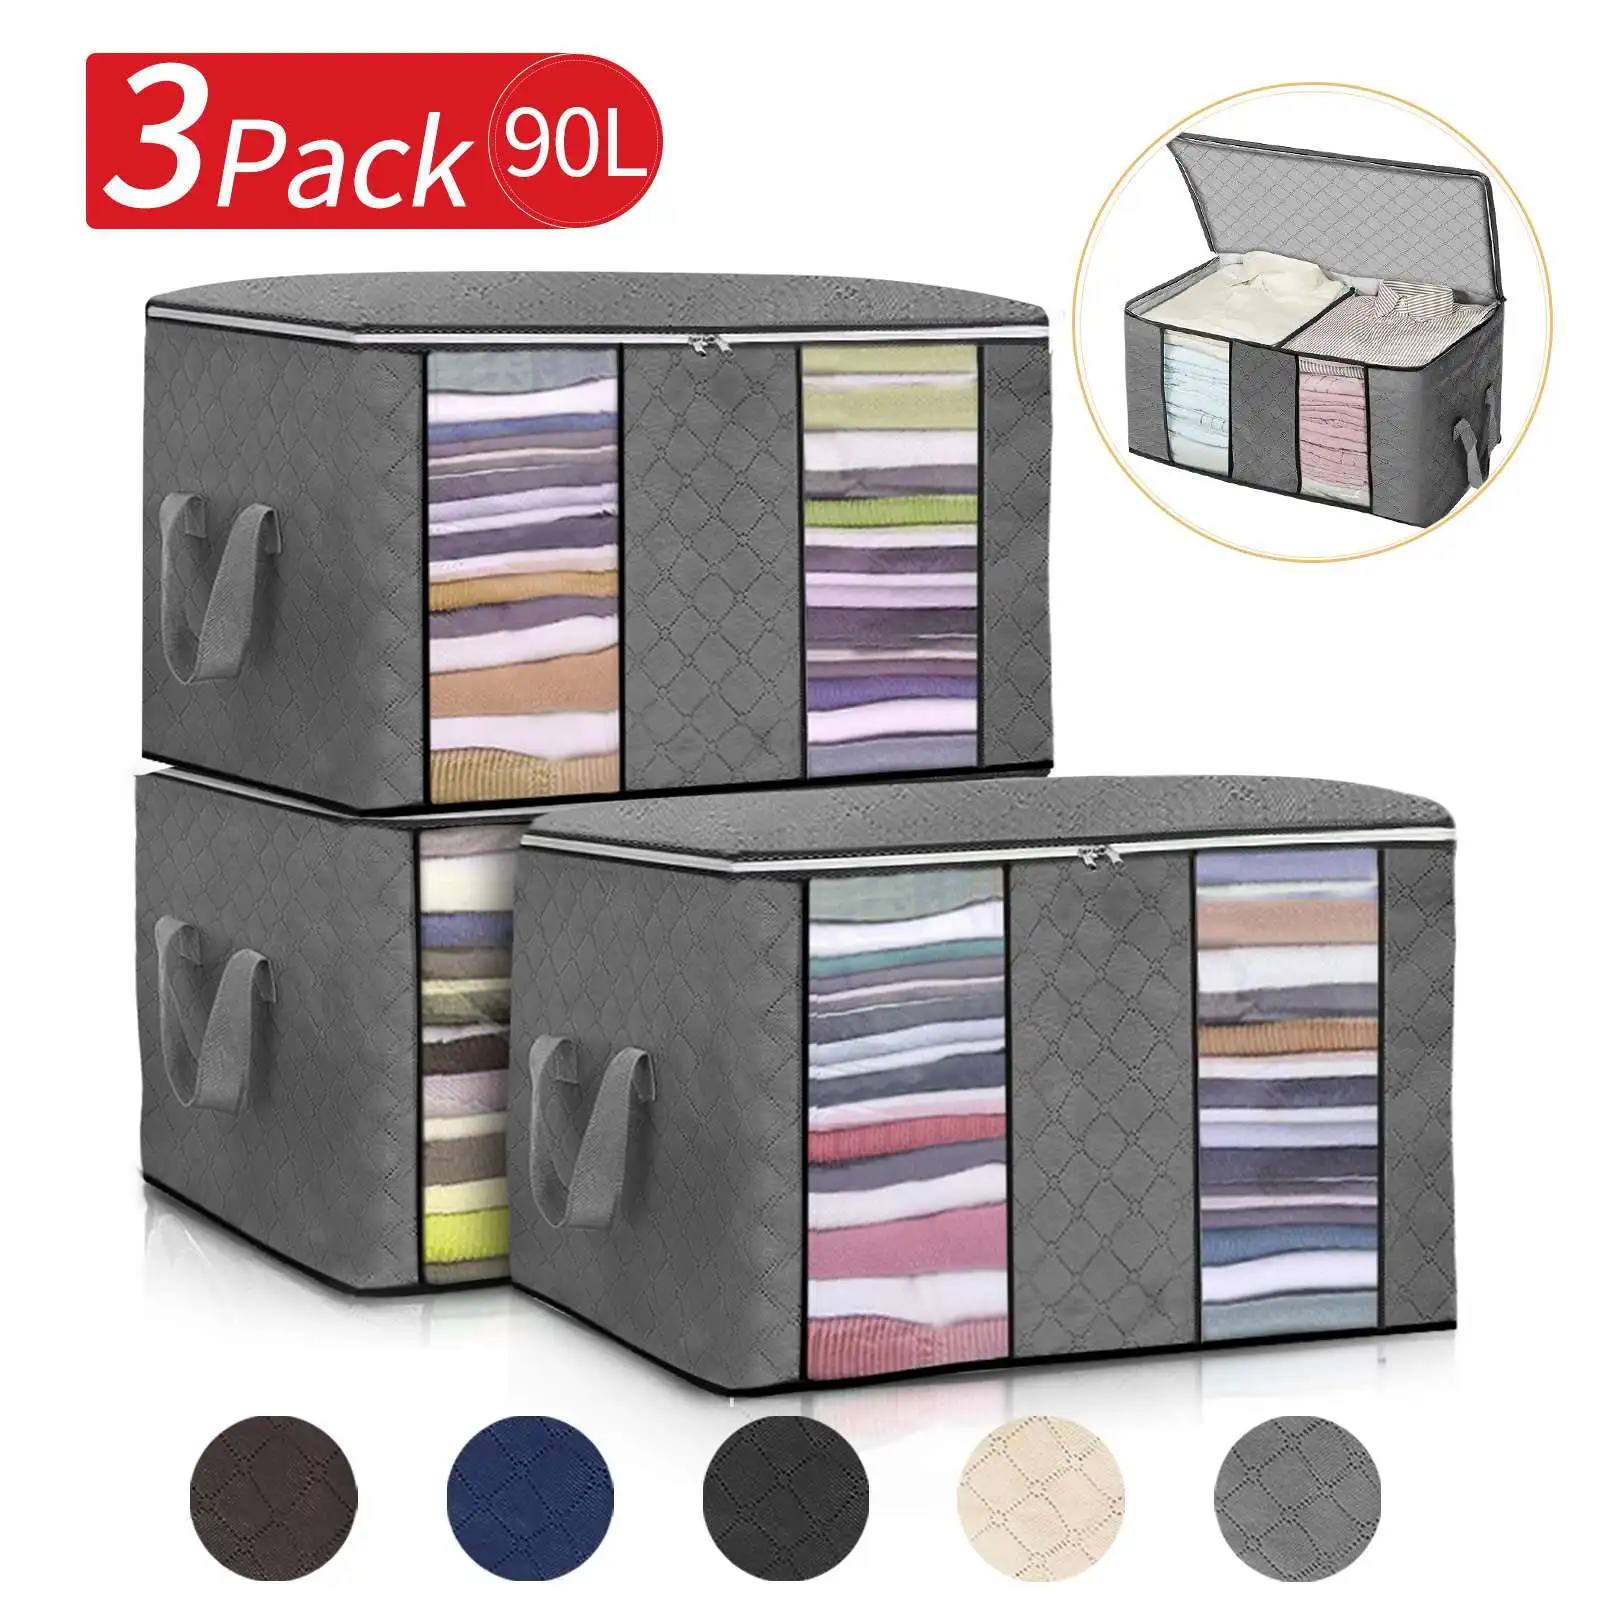 

90L 3pcs/set Large Capacity Clothes Storage Bag Home Organizer Foldable with Reinforced Handle for Comforters Blankets Bedding